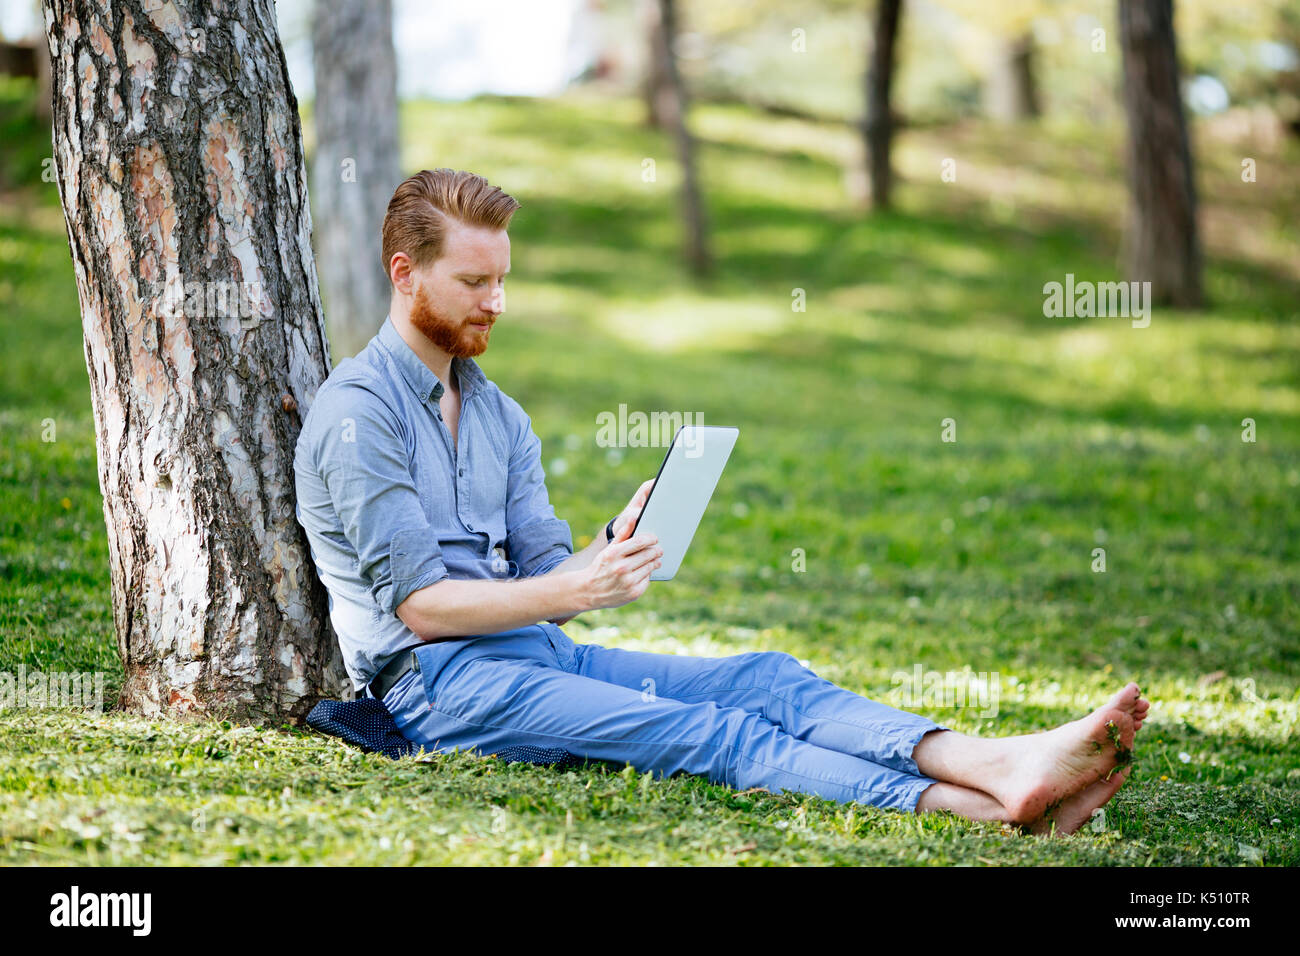 Businessman using tablet in park Stock Photo